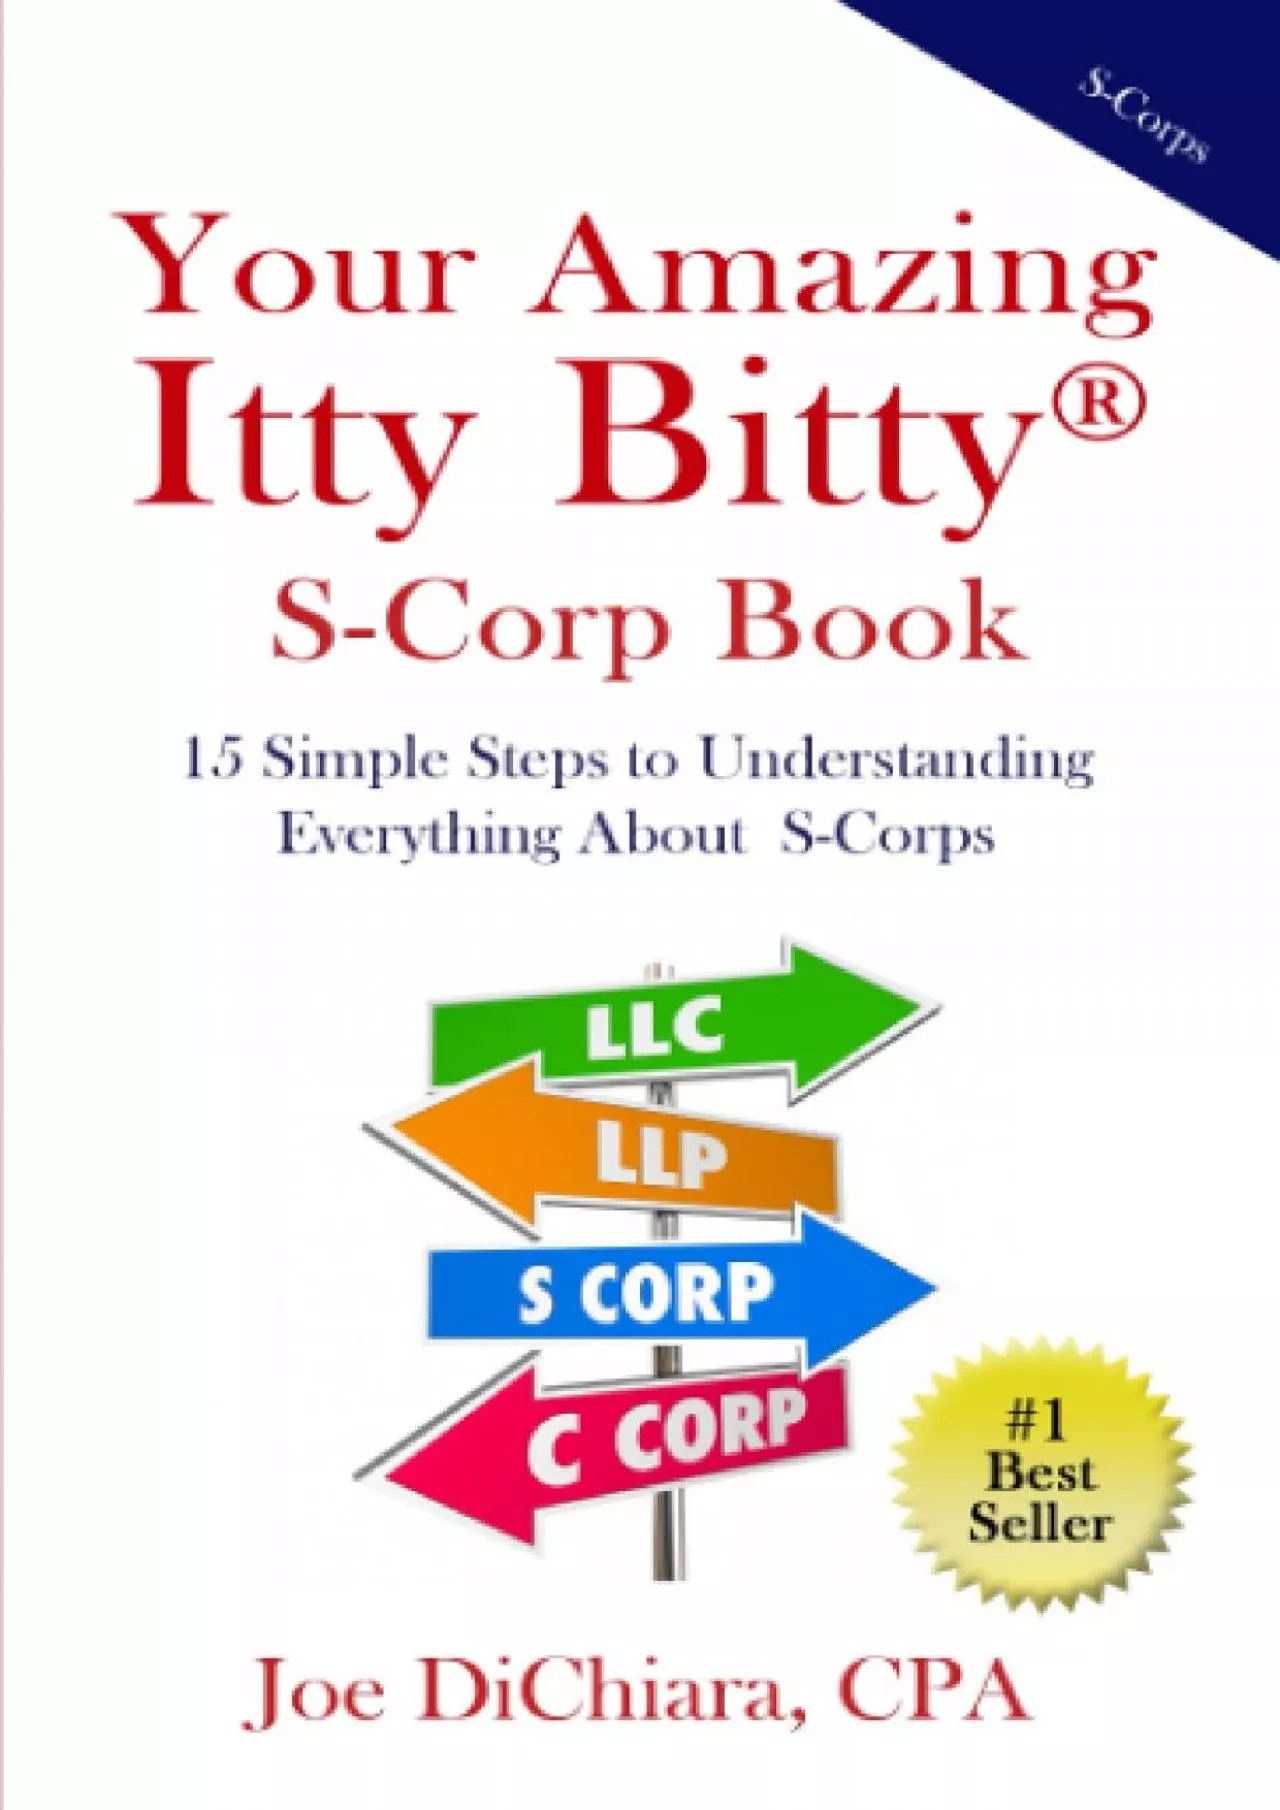 Your Amazing Itty BittyÂ® S-Corp Book: 15 Simple Steps to Understanding Everything About